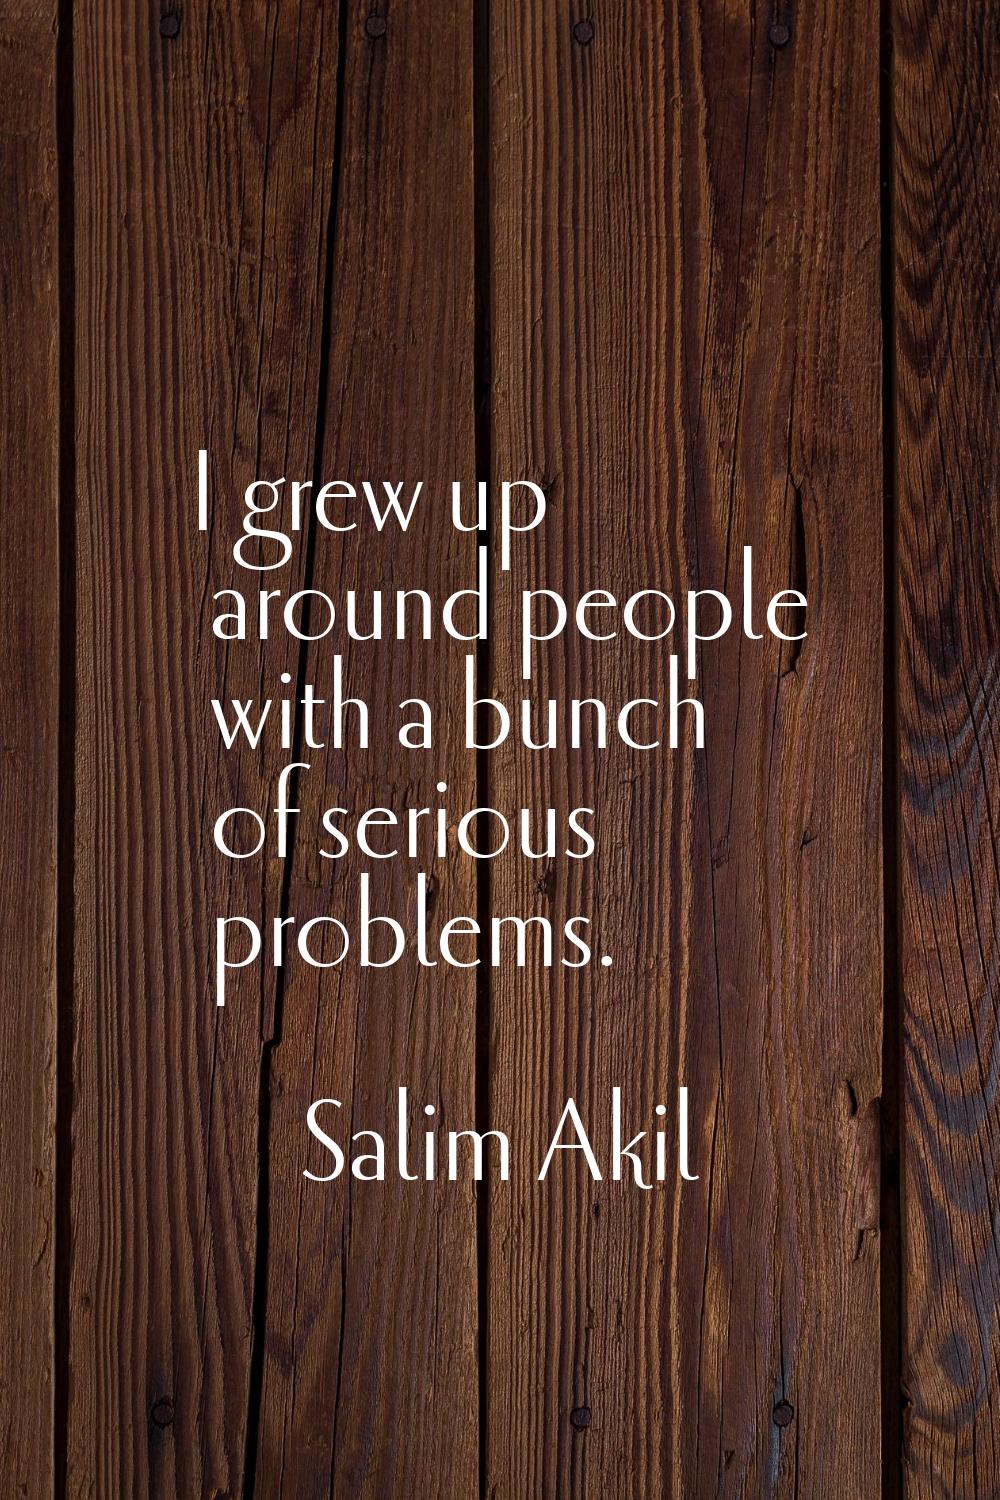 I grew up around people with a bunch of serious problems.